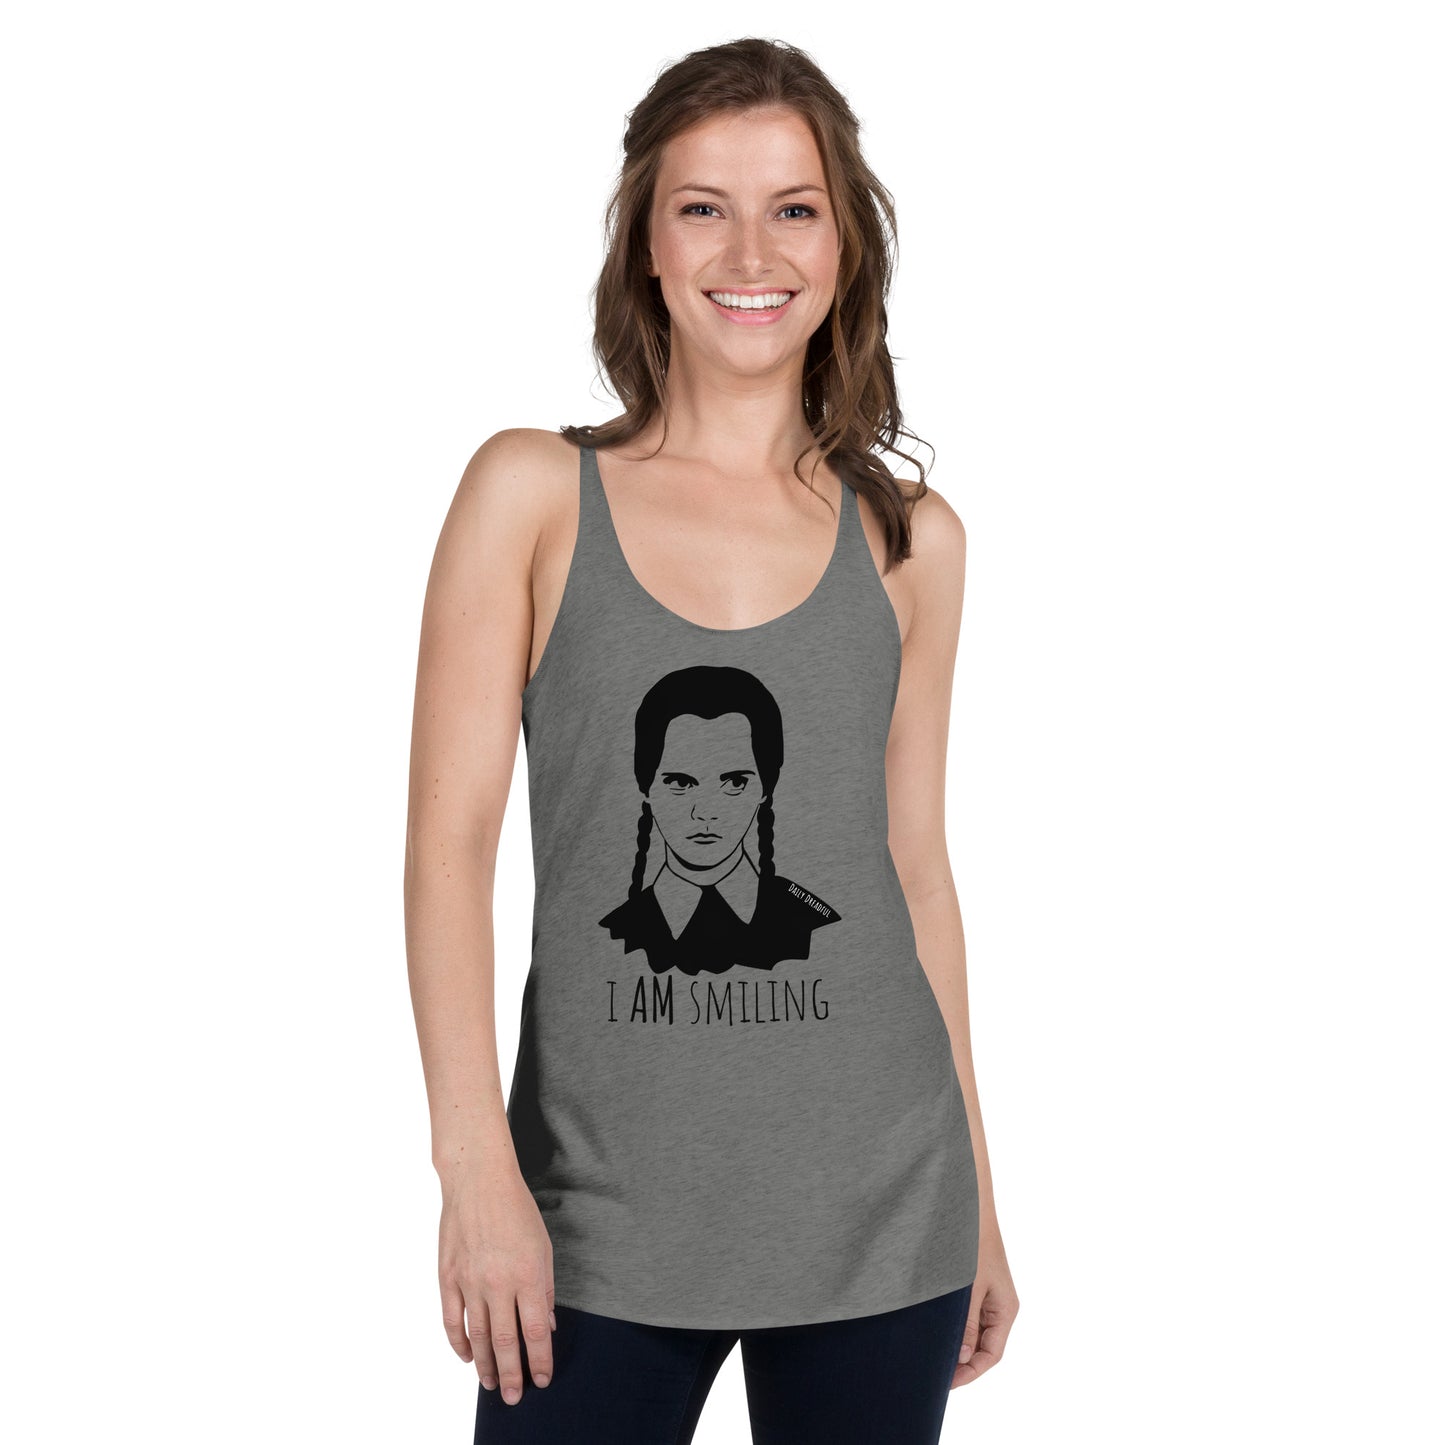 premium heather "I Am Smiling" Wednesday Addams Racerback Tank Top from Daily Dreadful